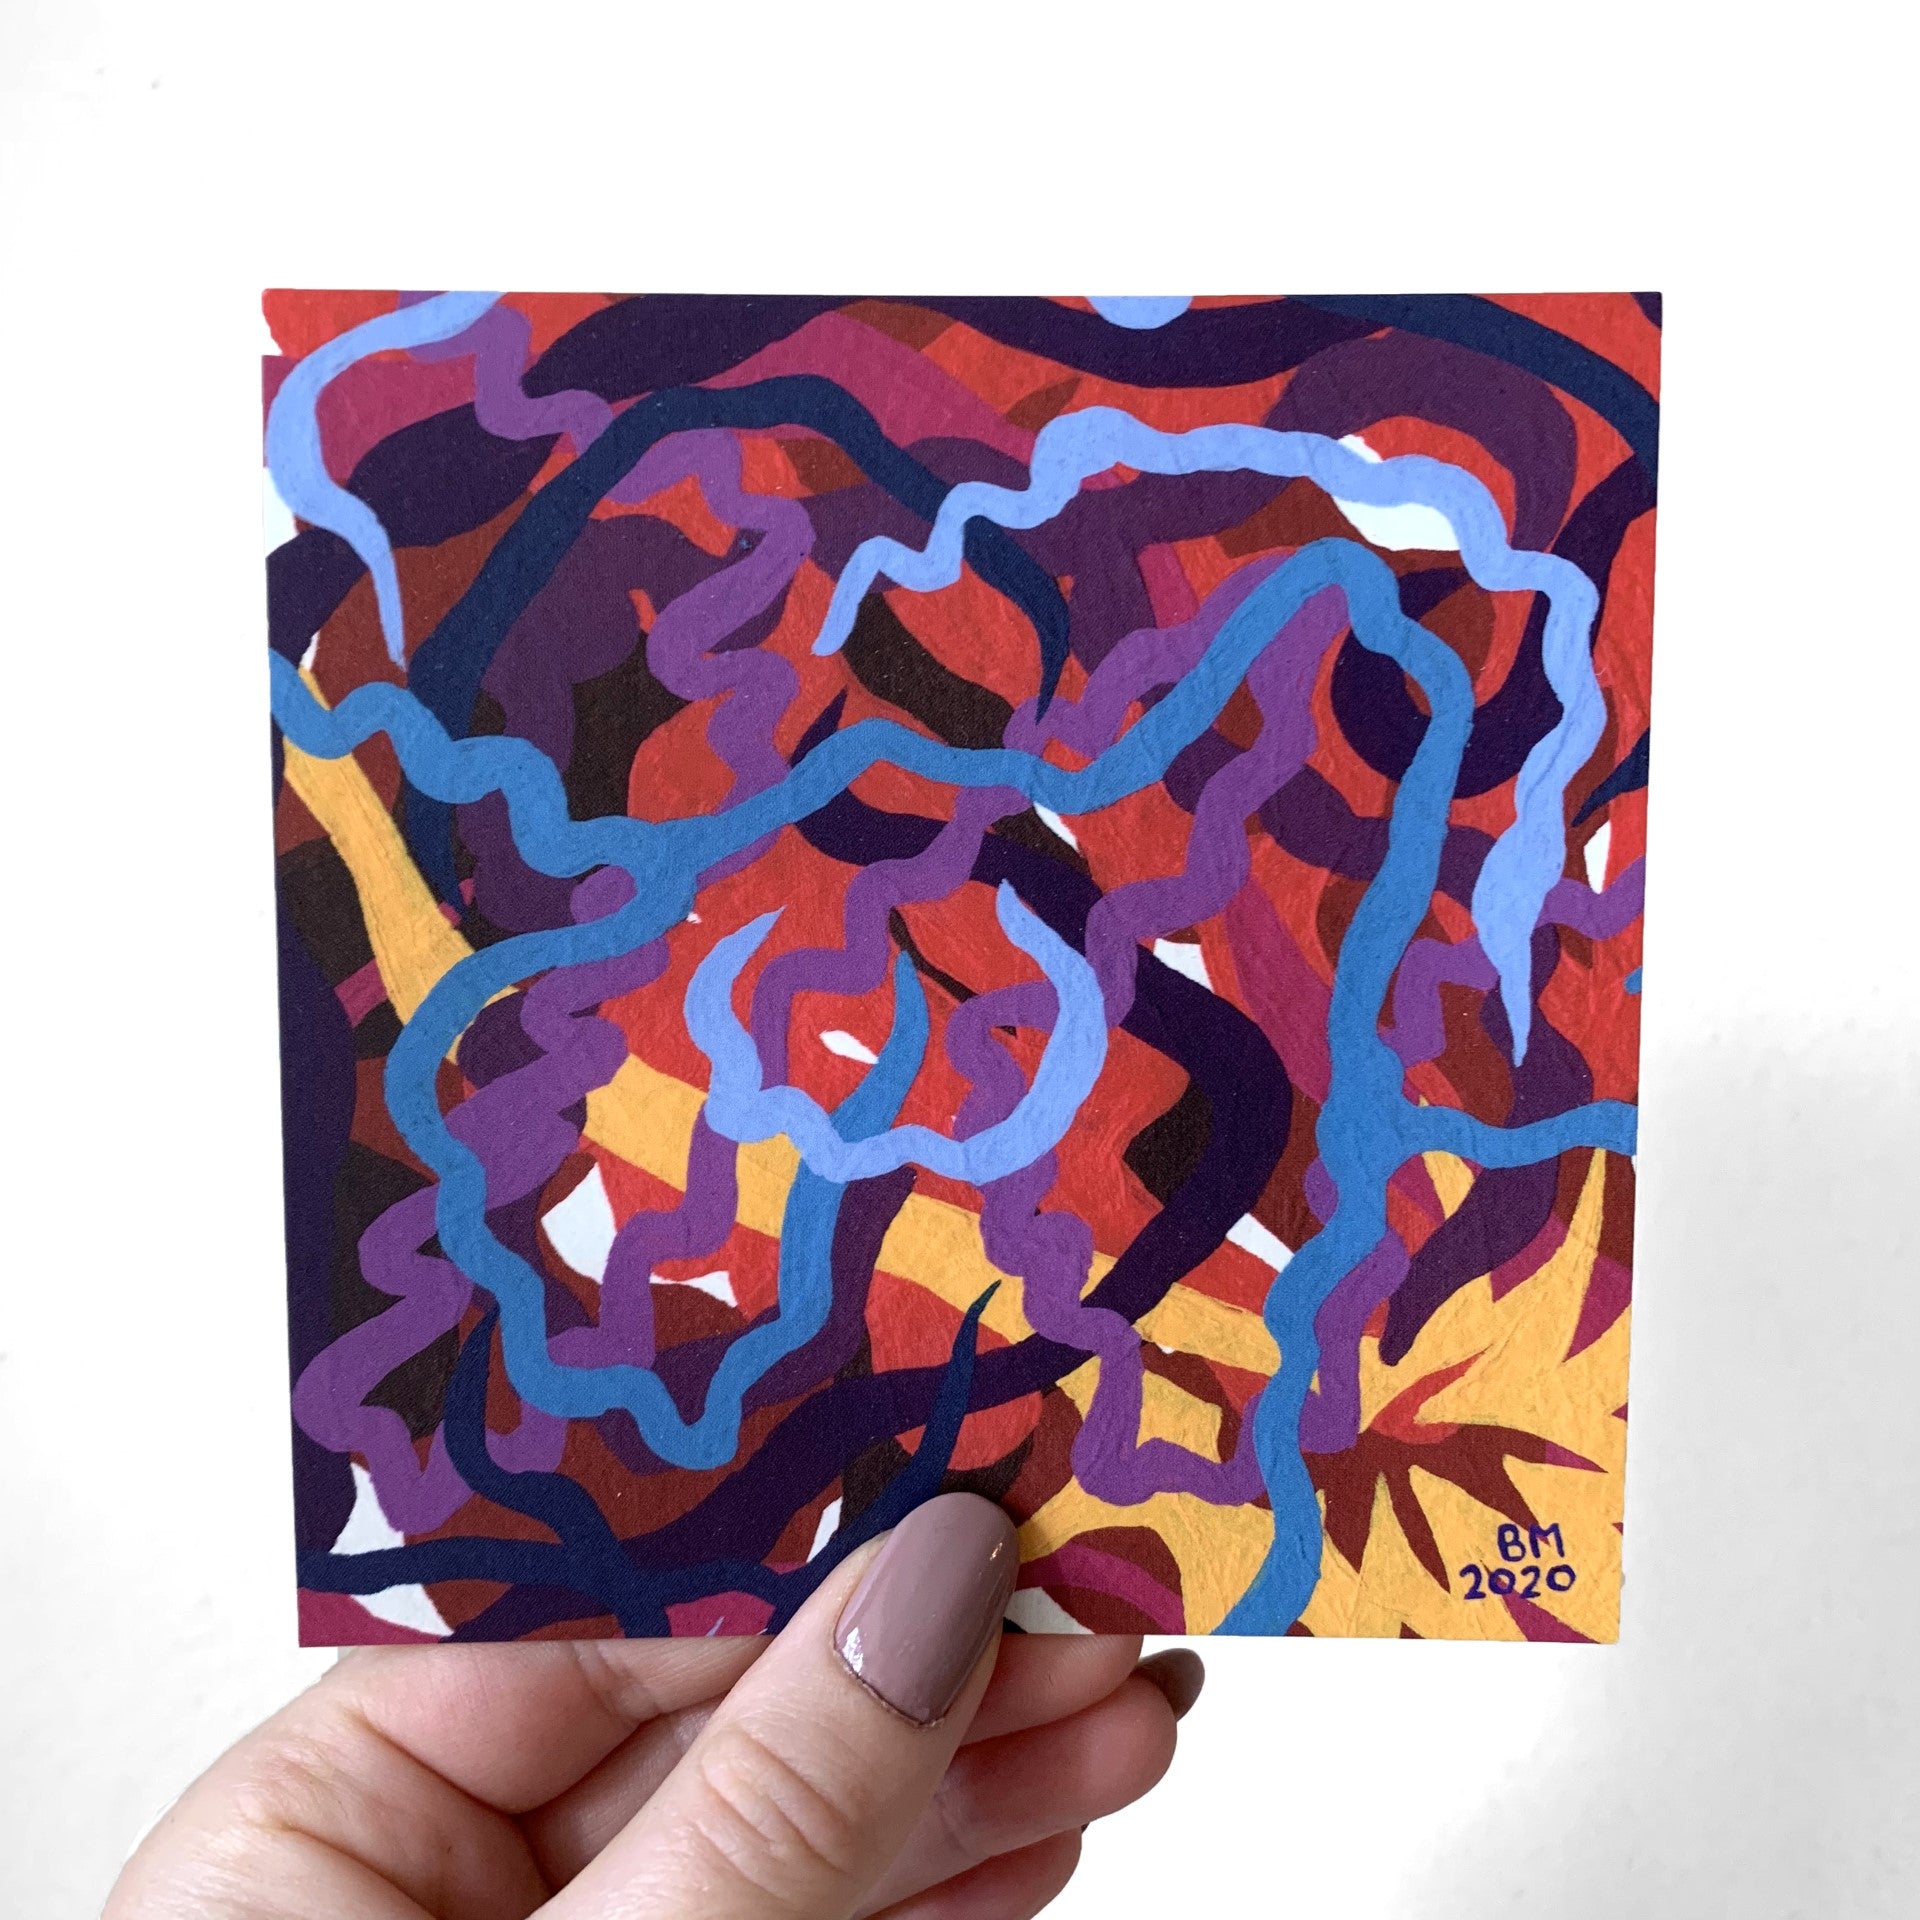 A hand holding a square print against a white background. The print consists of swirling abstract shapes in shades of purple, red and blue with a yellow line cutting amongst these shapes. The initials BM and the year 2020 are written in the bottom right corner.  